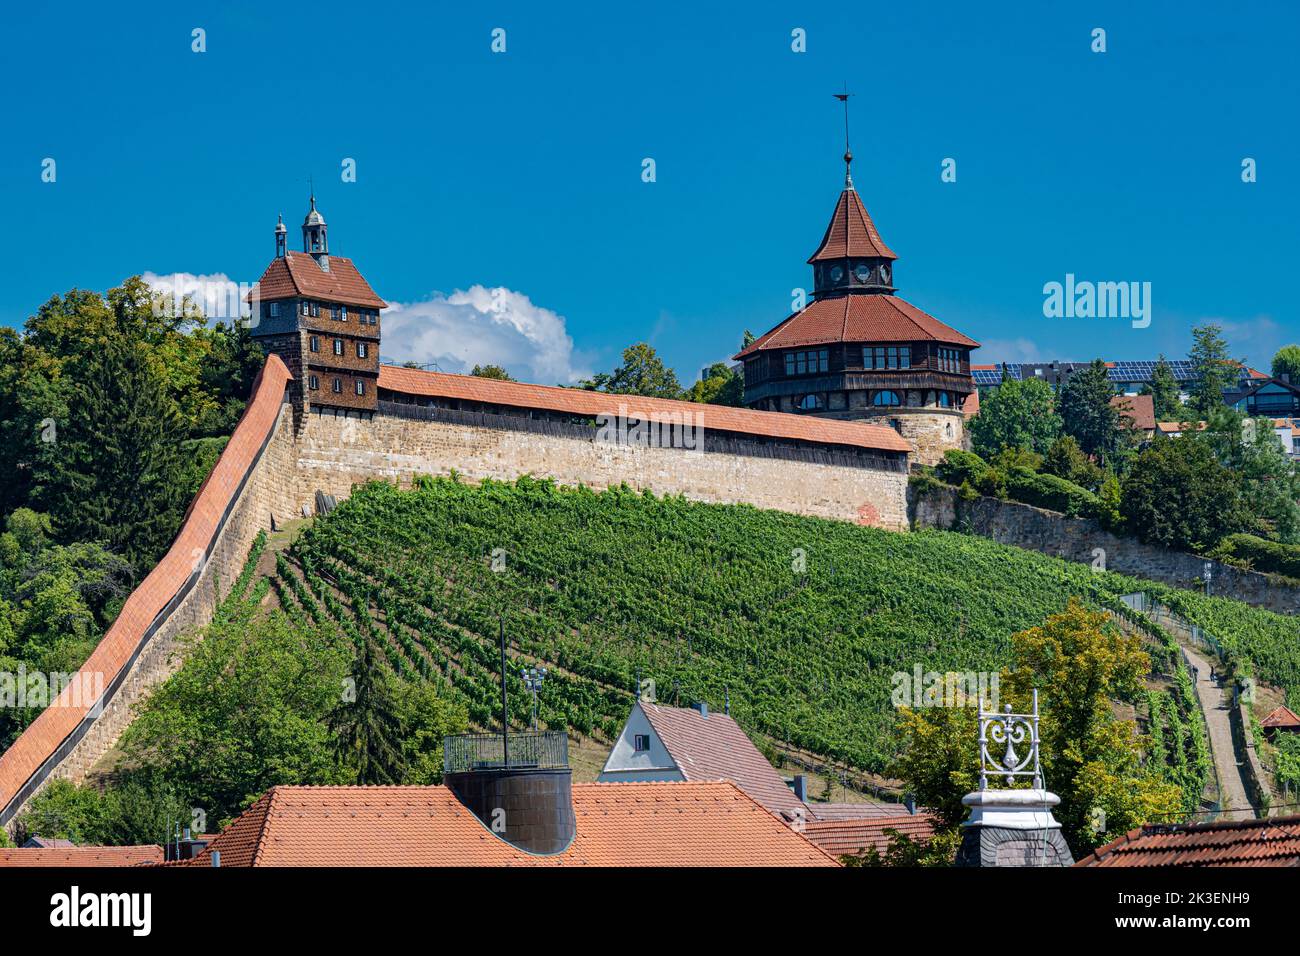 View of the historic city walls and castle Guardhouse (Hochwacht) and Thick Tower (Dicker Turm) in Esslingen am Neckar.Baden-Württemberg, Germany Euro Stock Photo